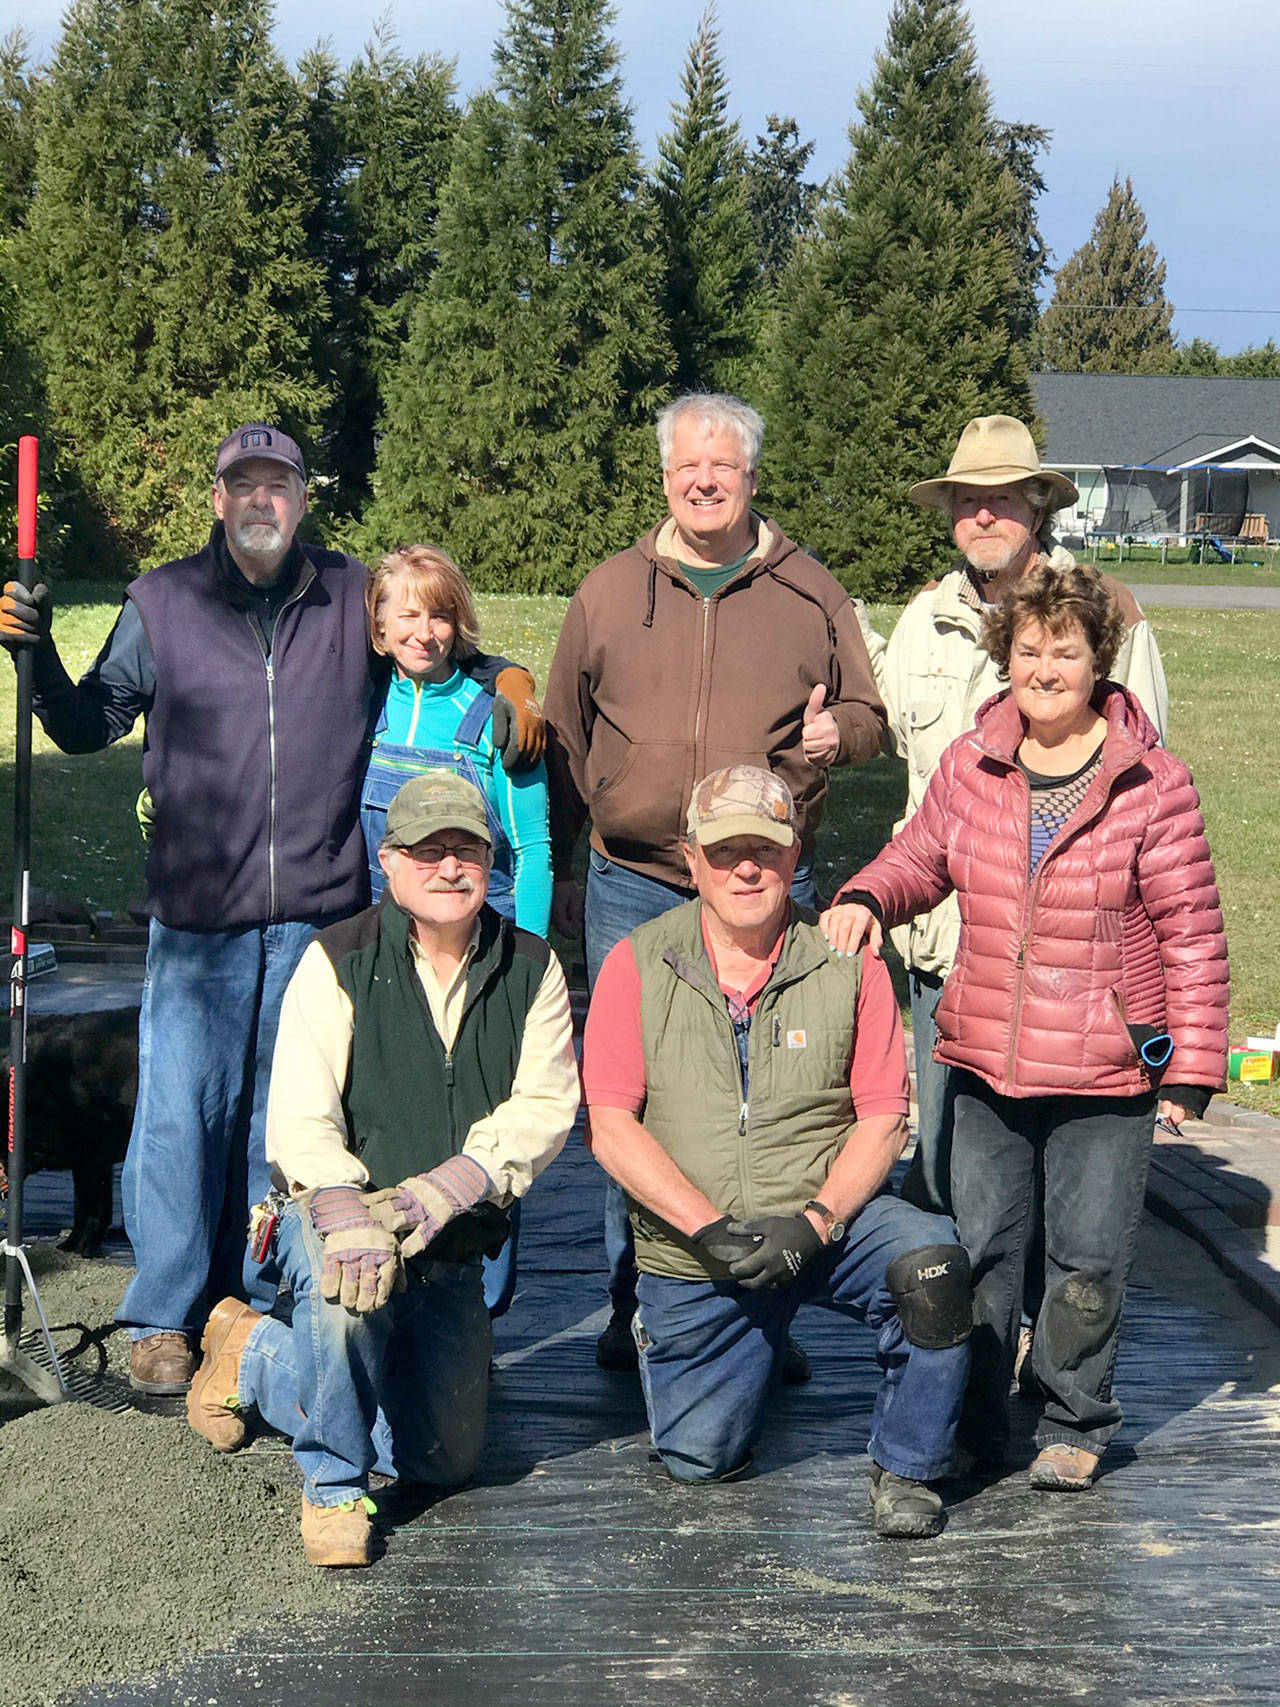 Friendship Garden construction team, pictured, back row, from left to right: Kevin Duffy, Nancy Duffy, Phil Zenner and Tom Massey; front row, from left to right: Brian Berardo, Lou Foldoe and Rose Prestipino.